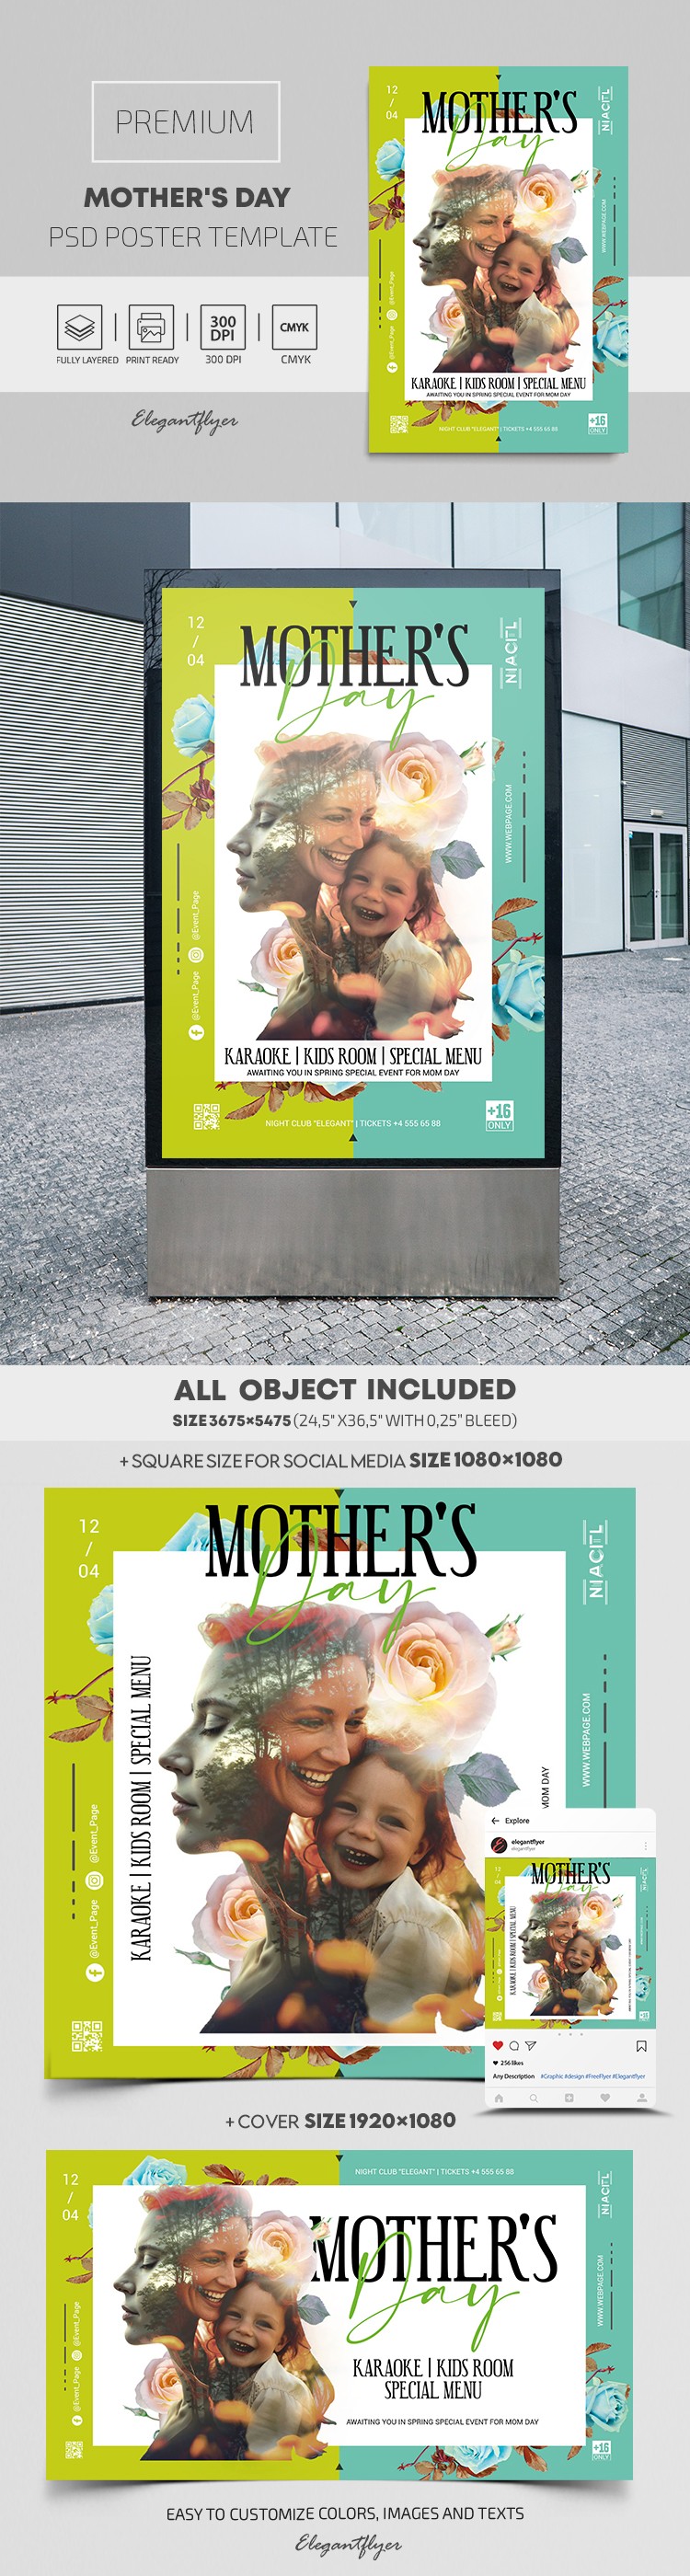 Mother's Day Event by ElegantFlyer